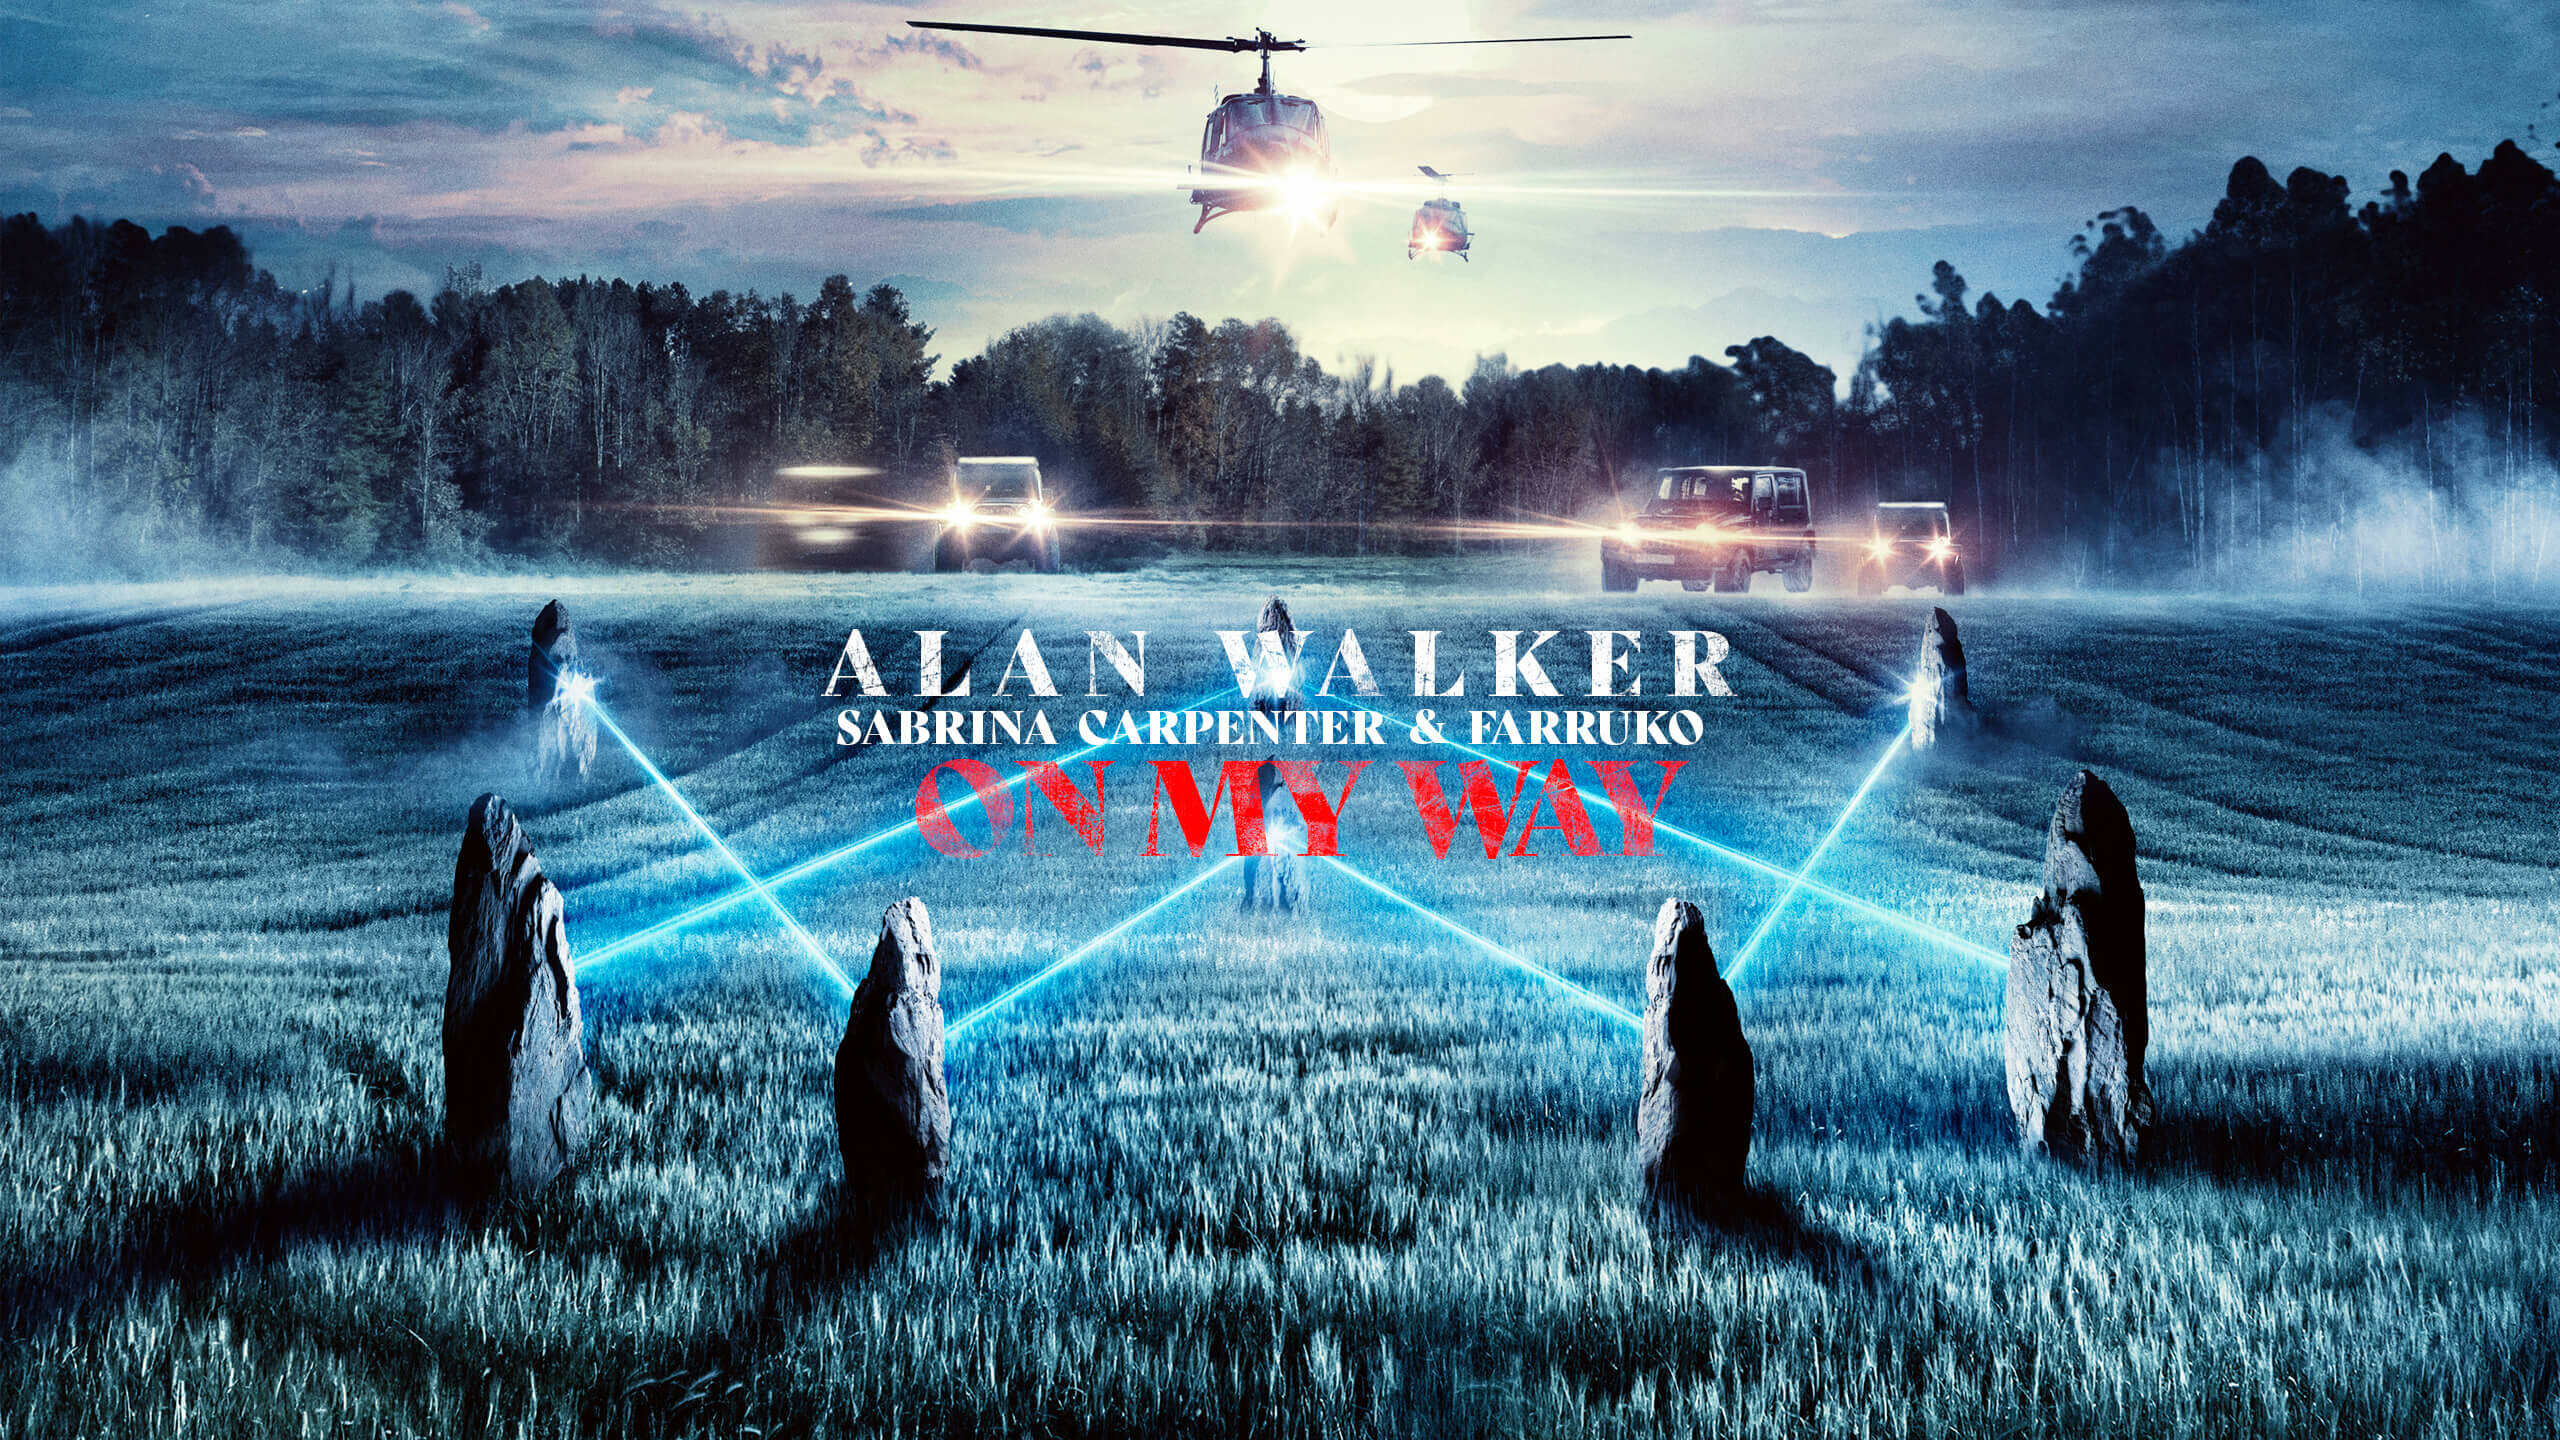 Alan Walker: “On My Way”, A song with American singer Sabrina Carpenter and Puerto Rican singer Farruko. 2560x1440 HD Wallpaper.